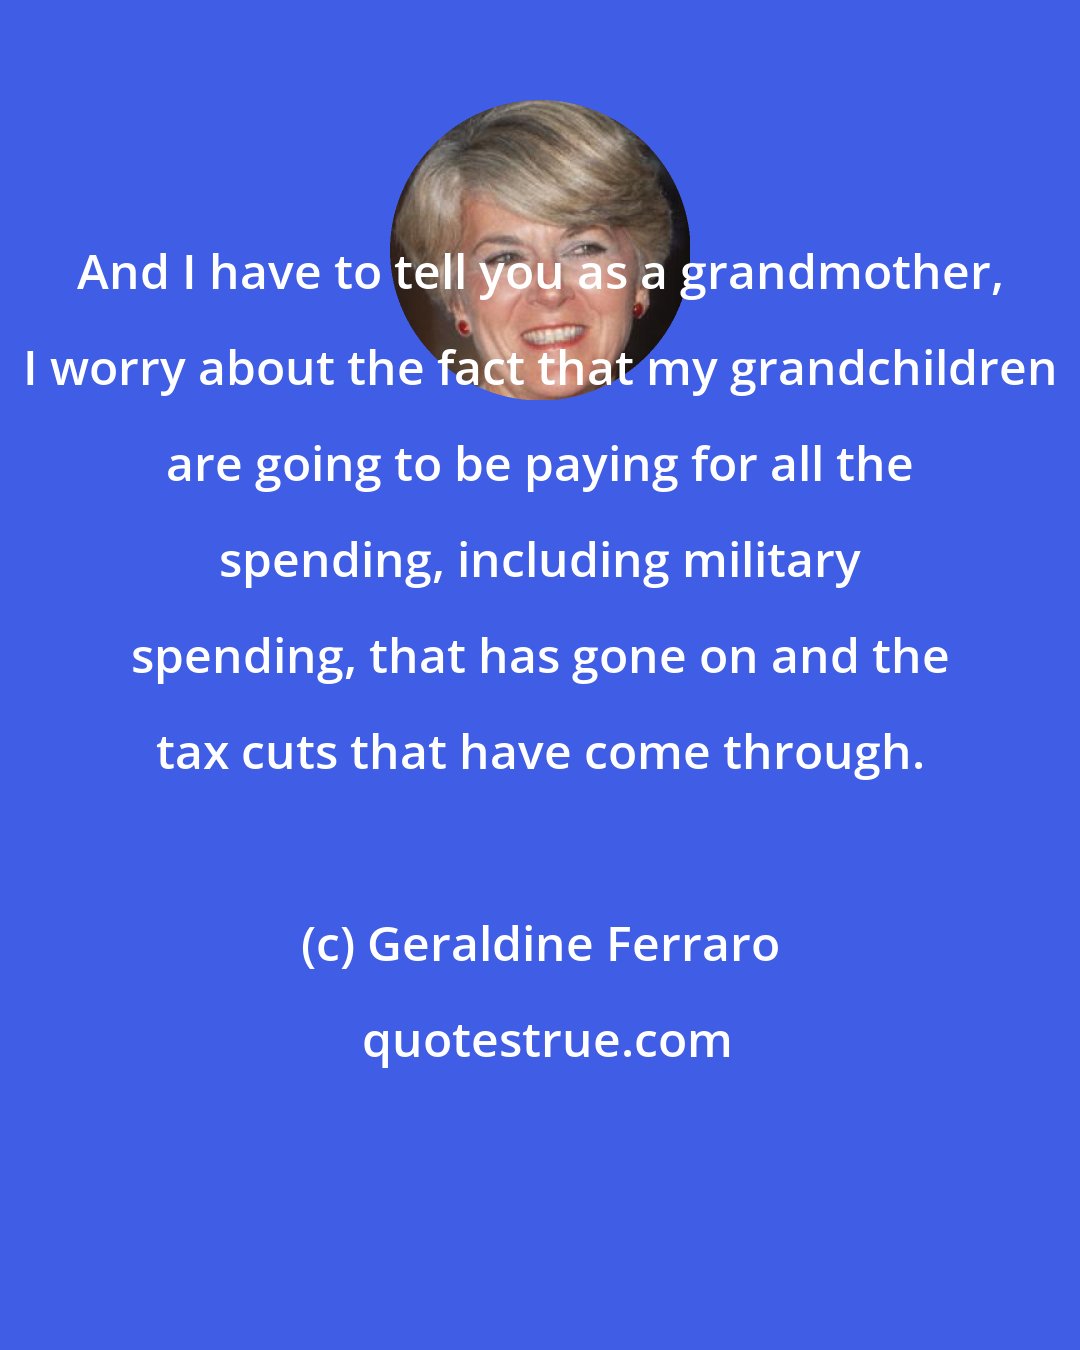 Geraldine Ferraro: And I have to tell you as a grandmother, I worry about the fact that my grandchildren are going to be paying for all the spending, including military spending, that has gone on and the tax cuts that have come through.